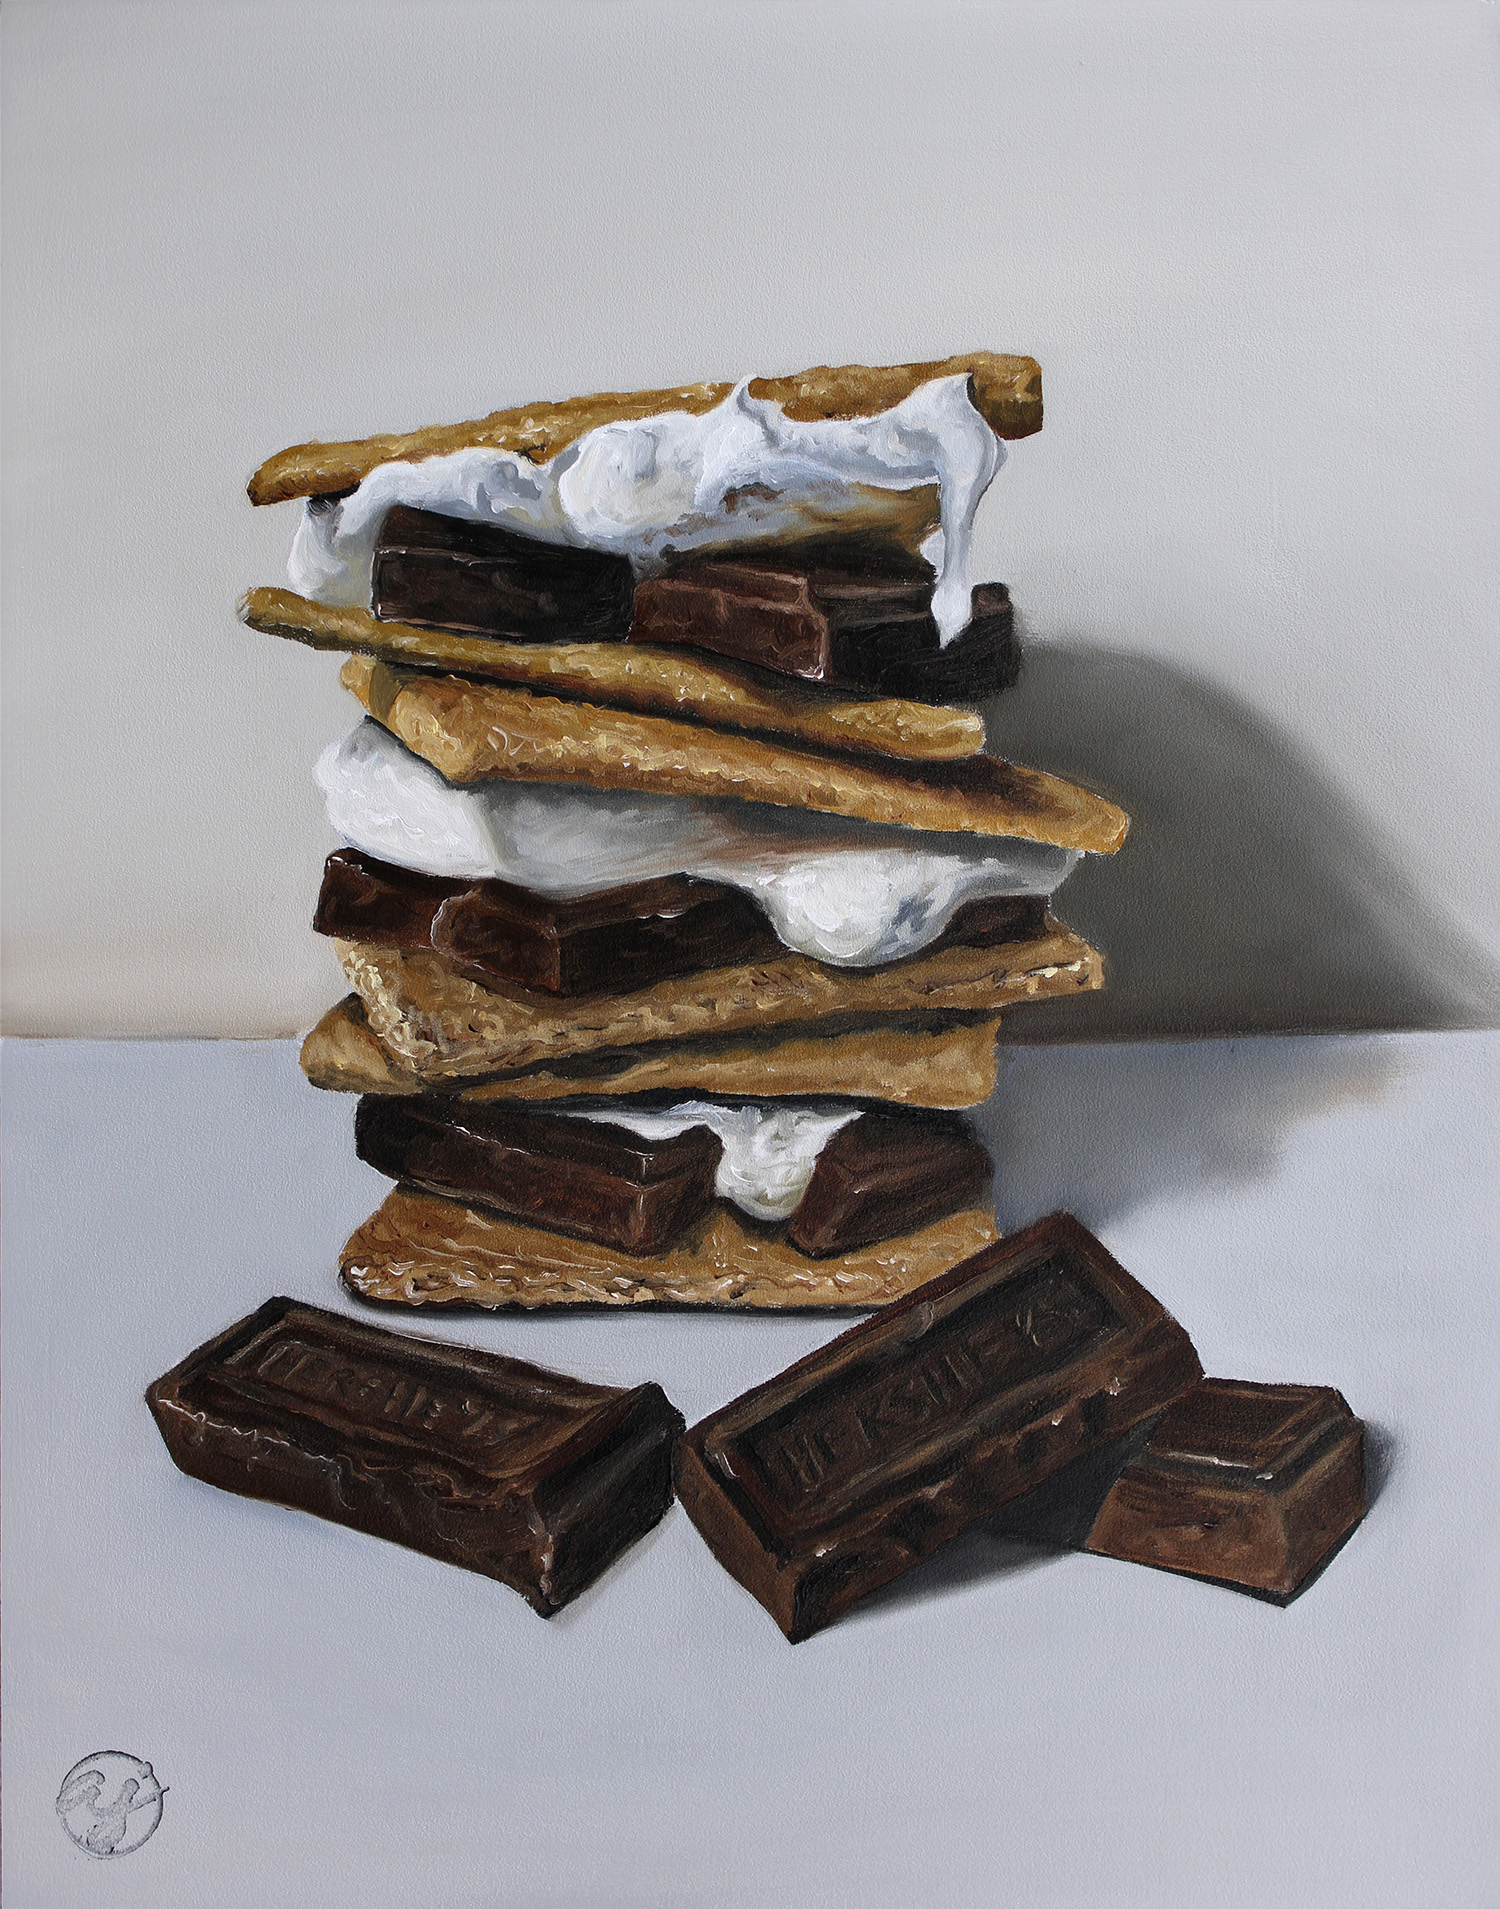 "S'Mores Please" 11x14 Original Oil Painting by Abra Johnson